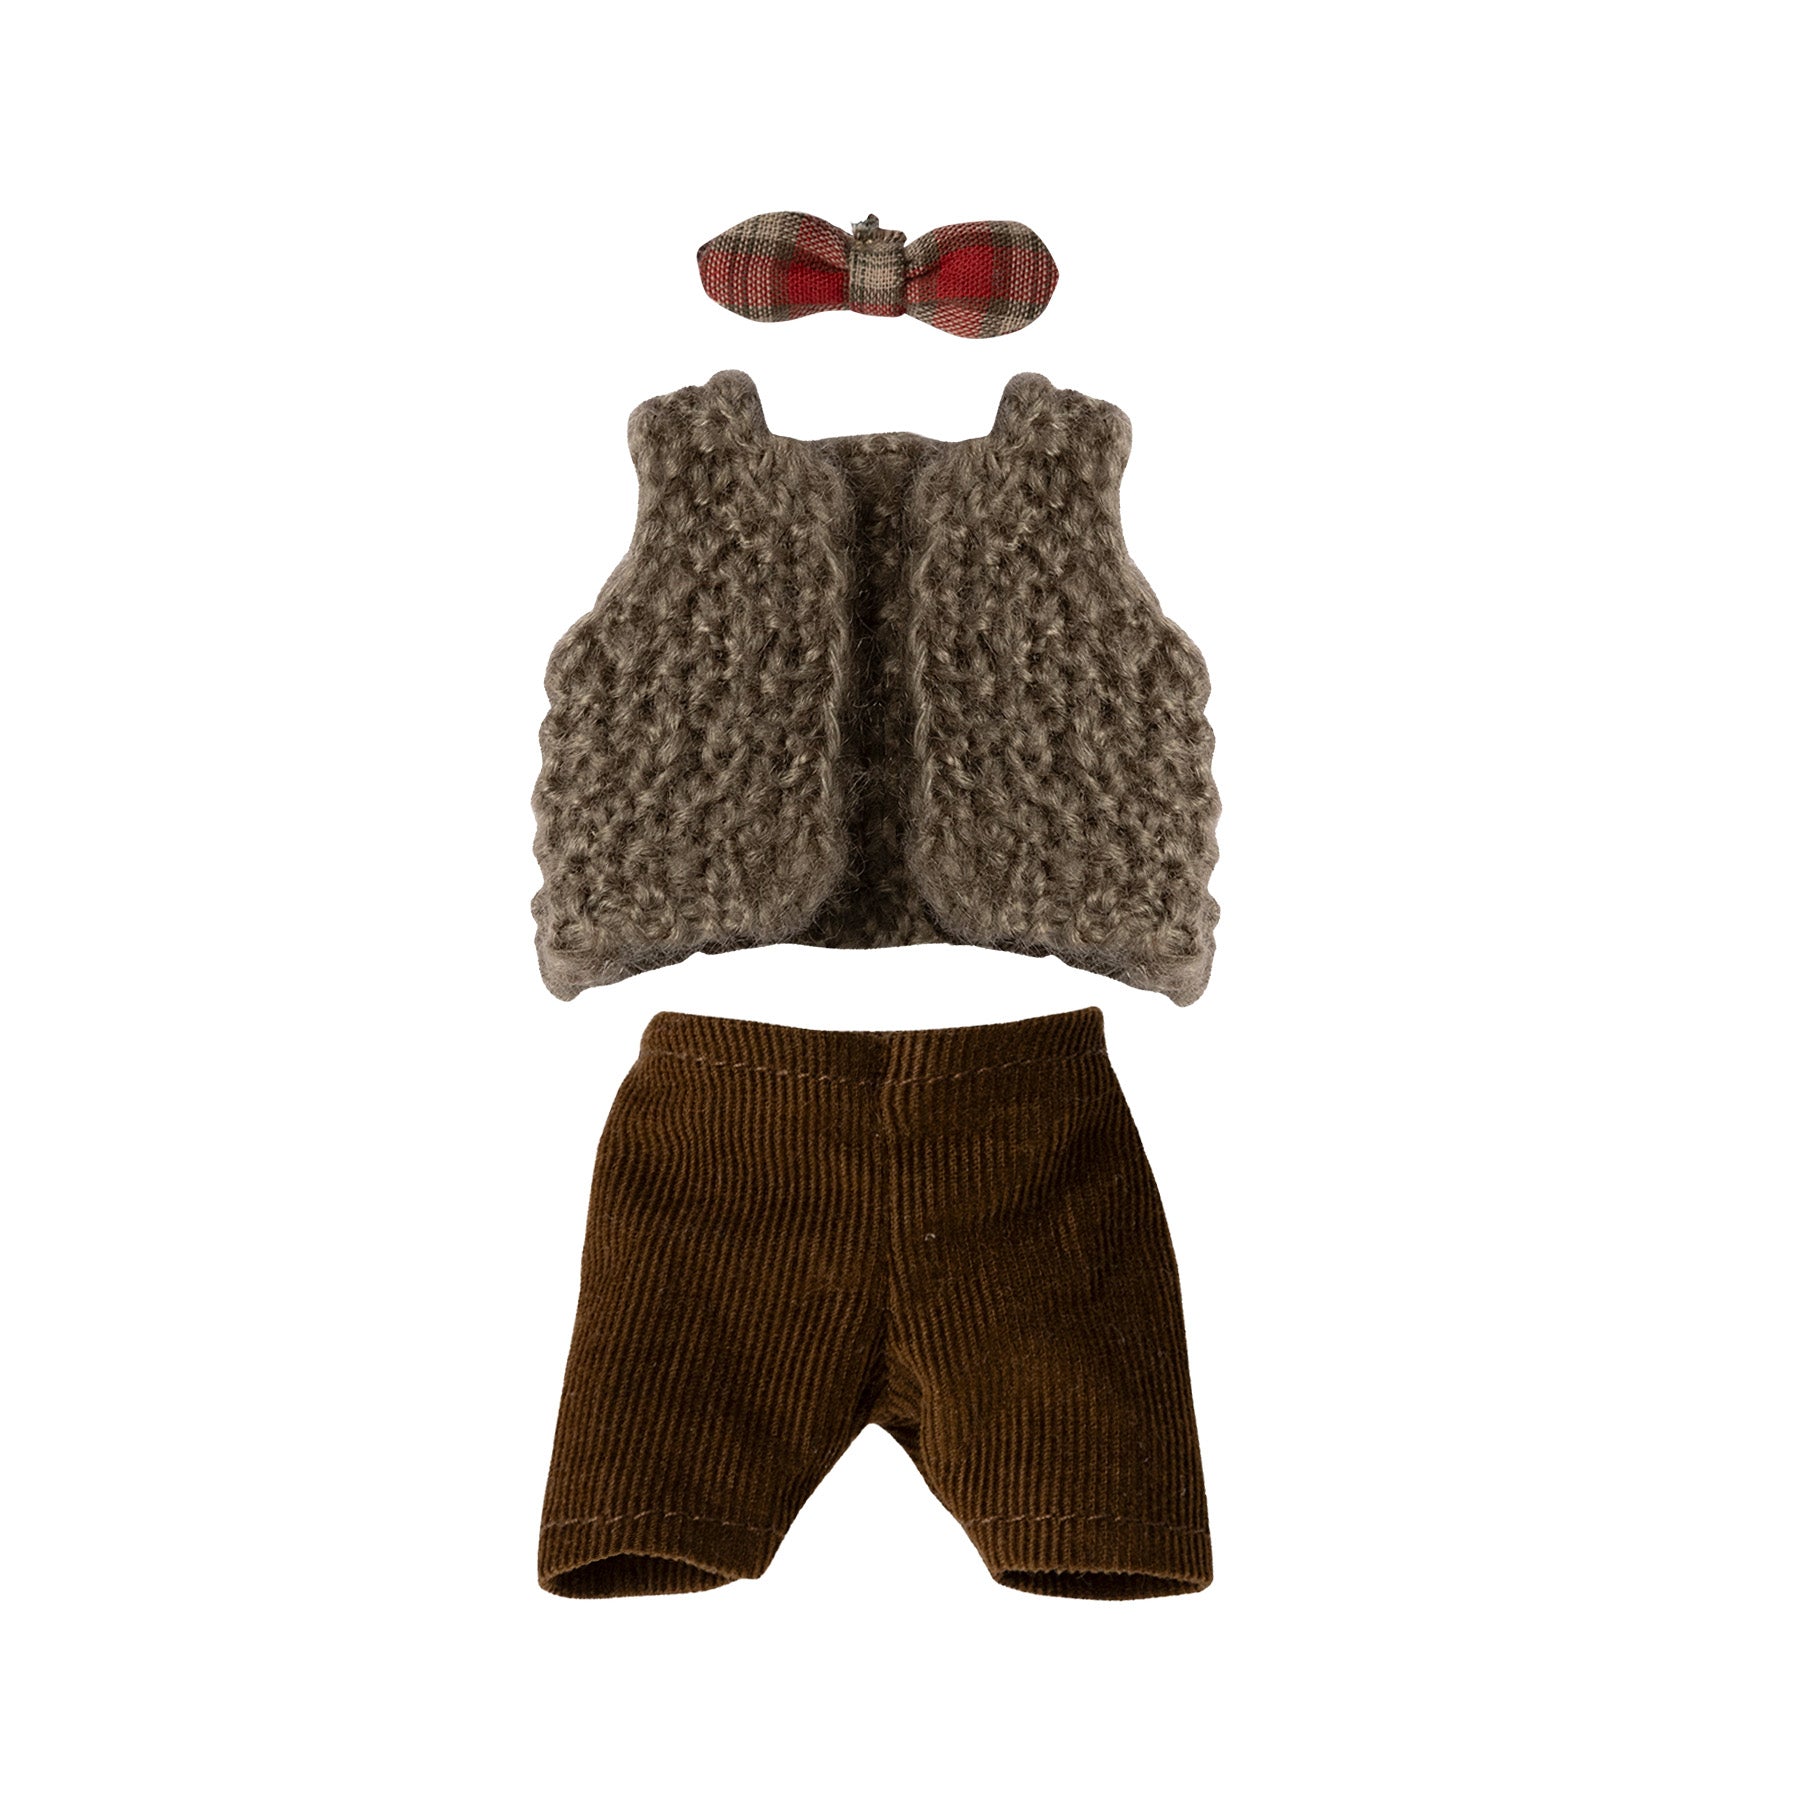 maileg grandpa clothes - trousers, vest and bow tie